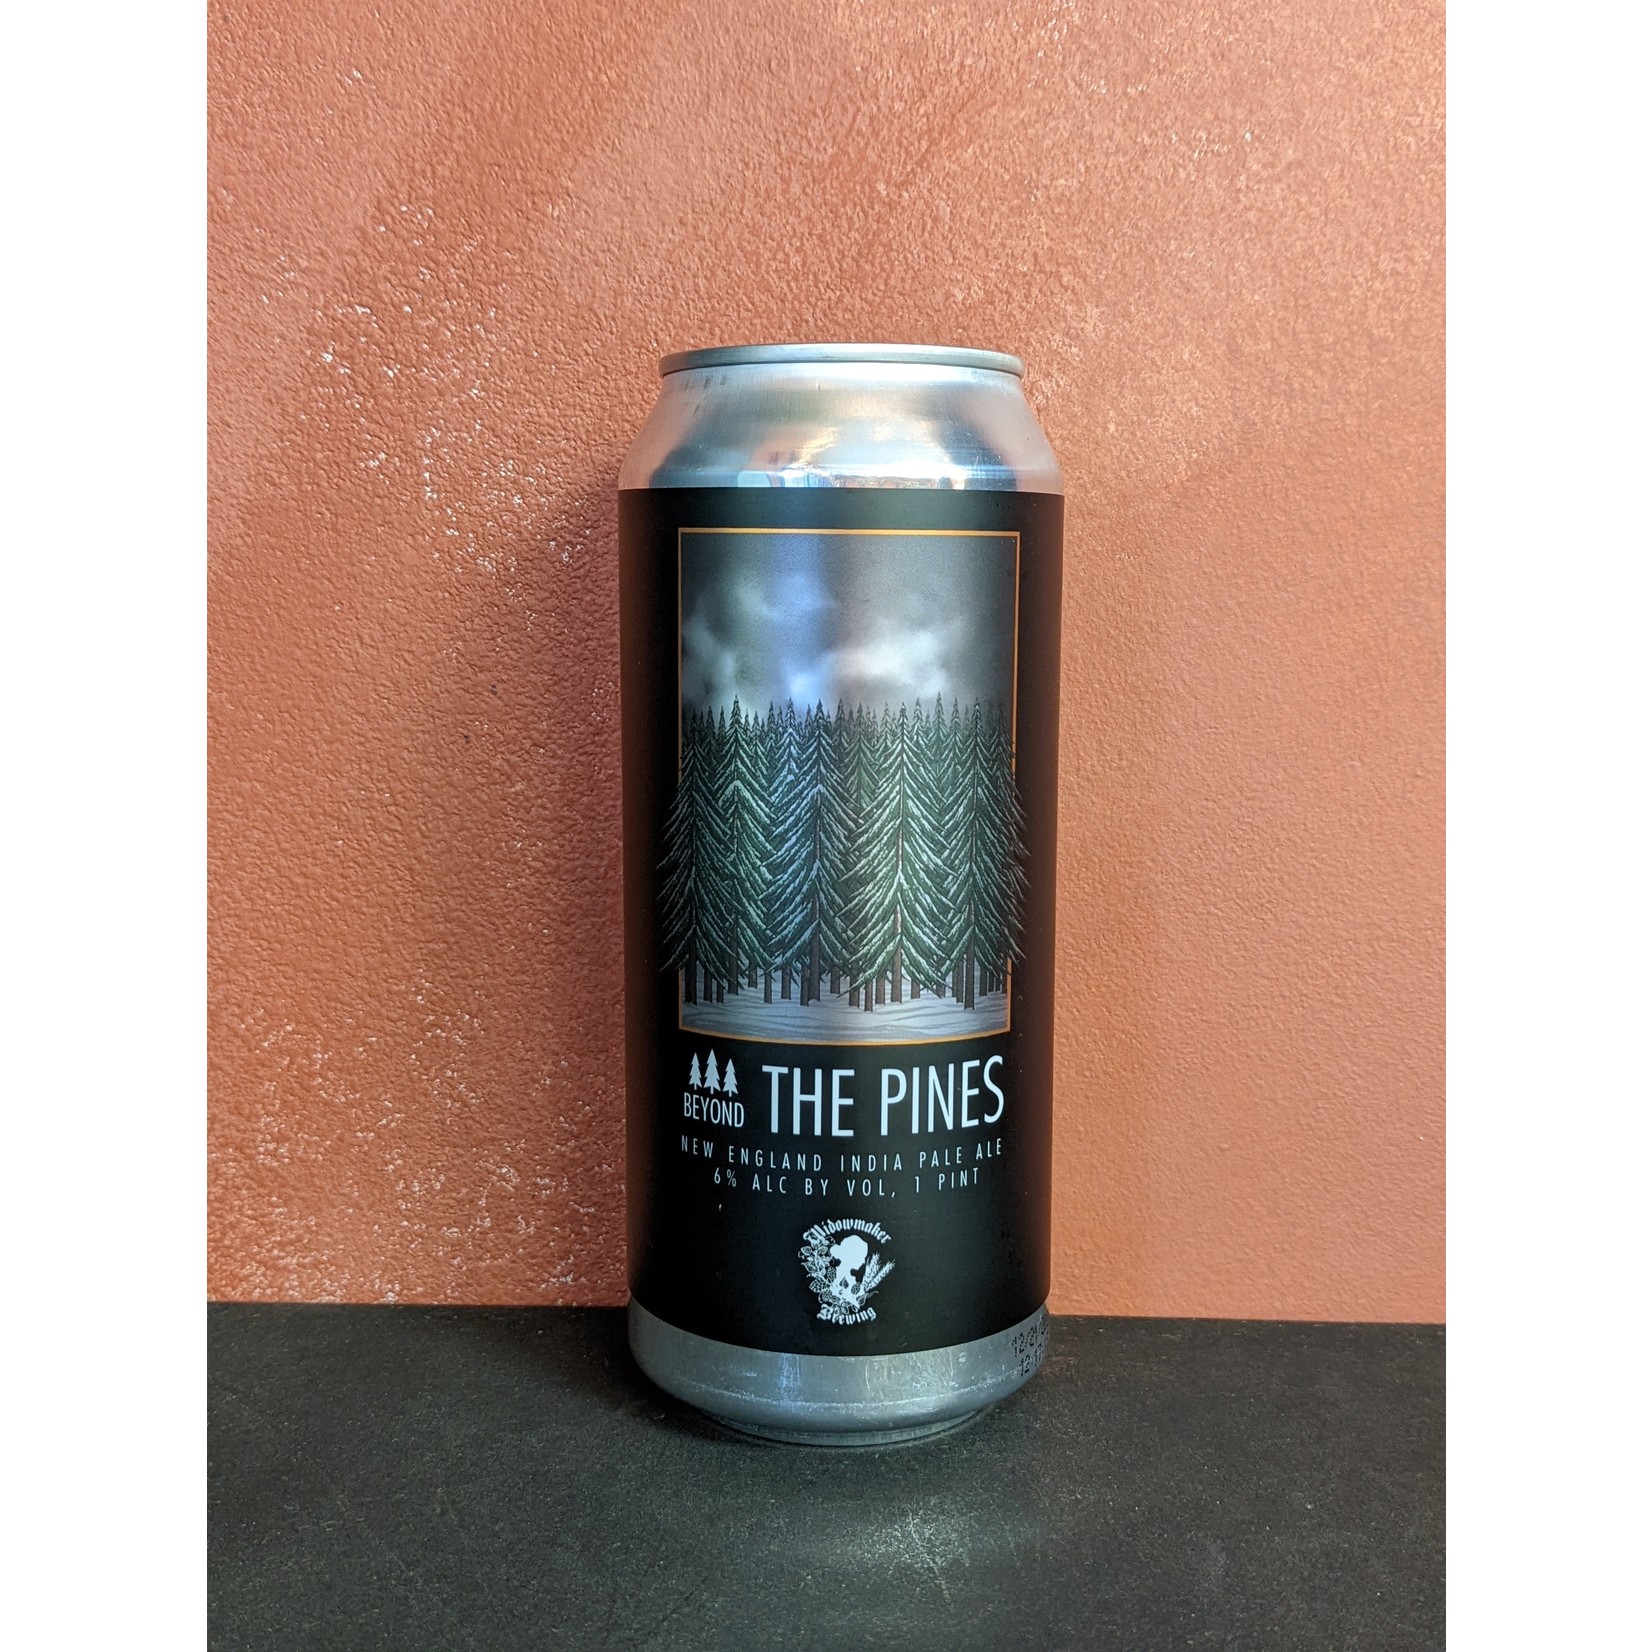 Widowmaker "Beyond the Pines" IPA CAN